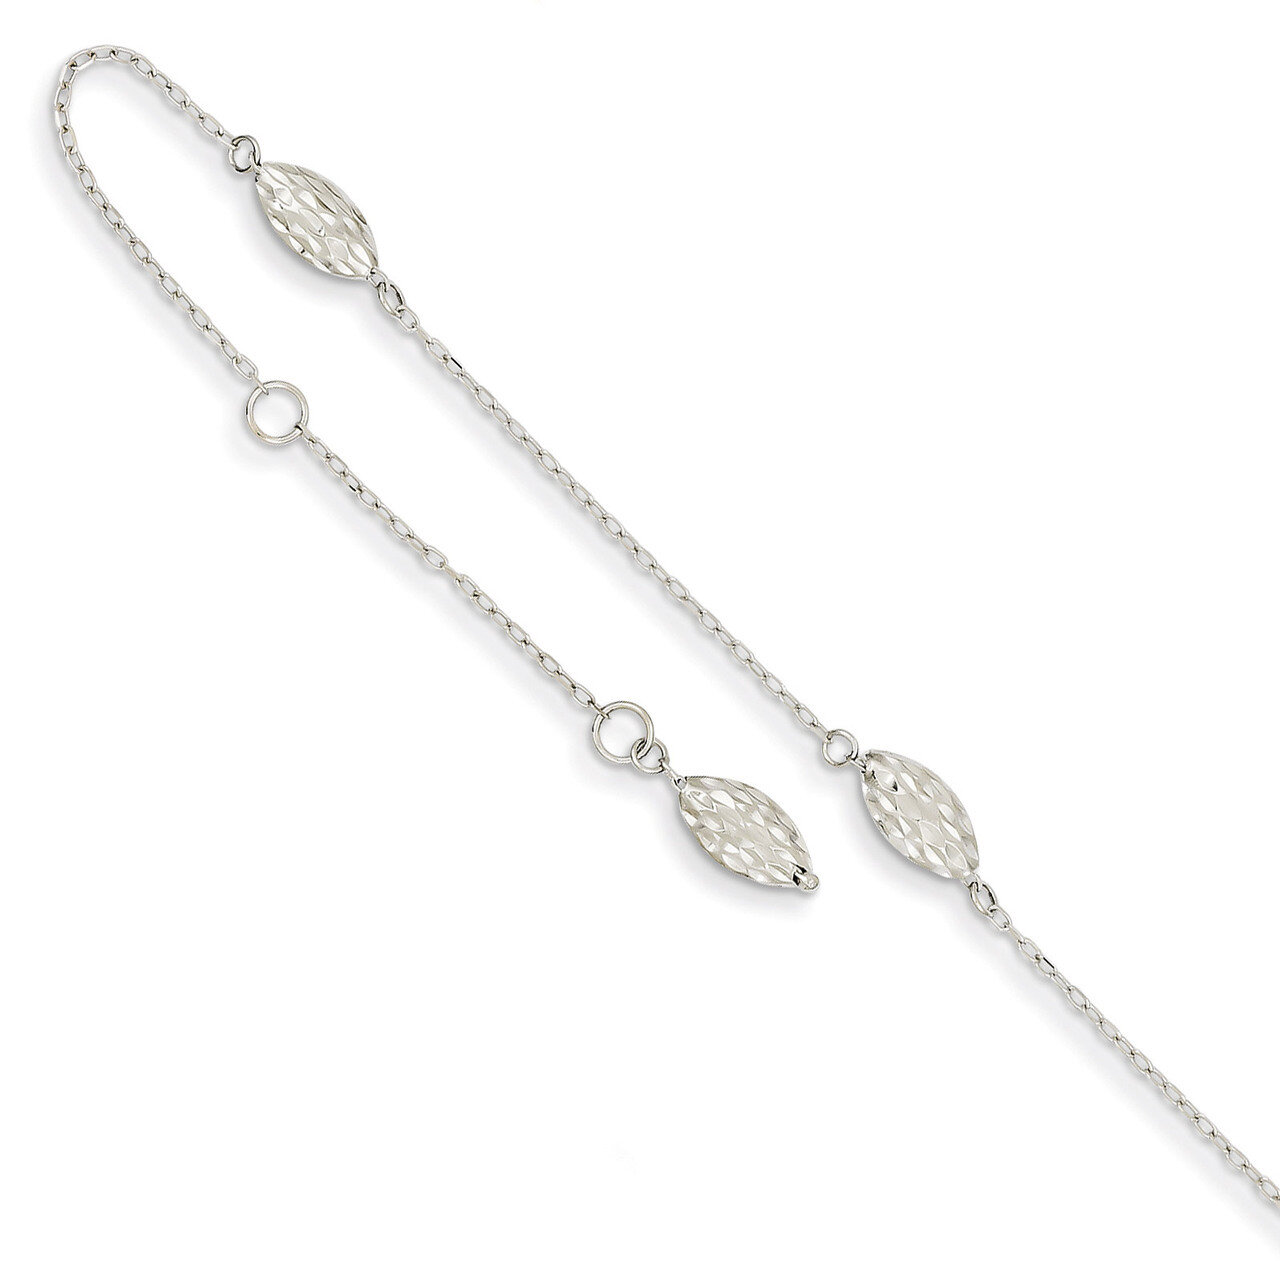 Puffed Rice Bead Anklet 9 Inch 14k White Gold ANK181-9